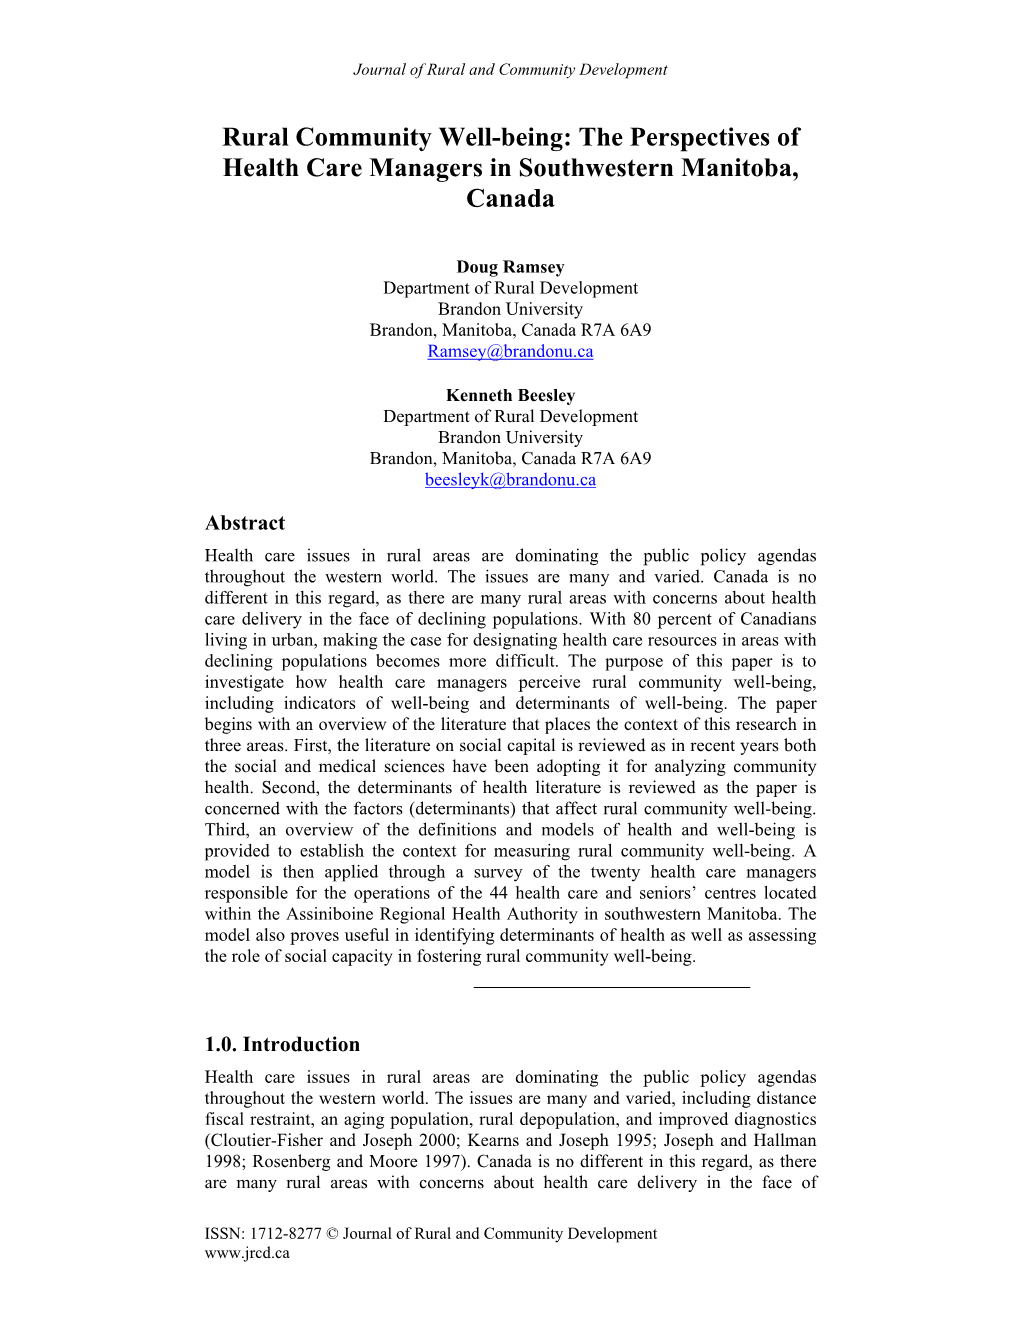 Rural Community Well-Being: the Perspectives of Health Care Managers in Southwestern Manitoba, Canada